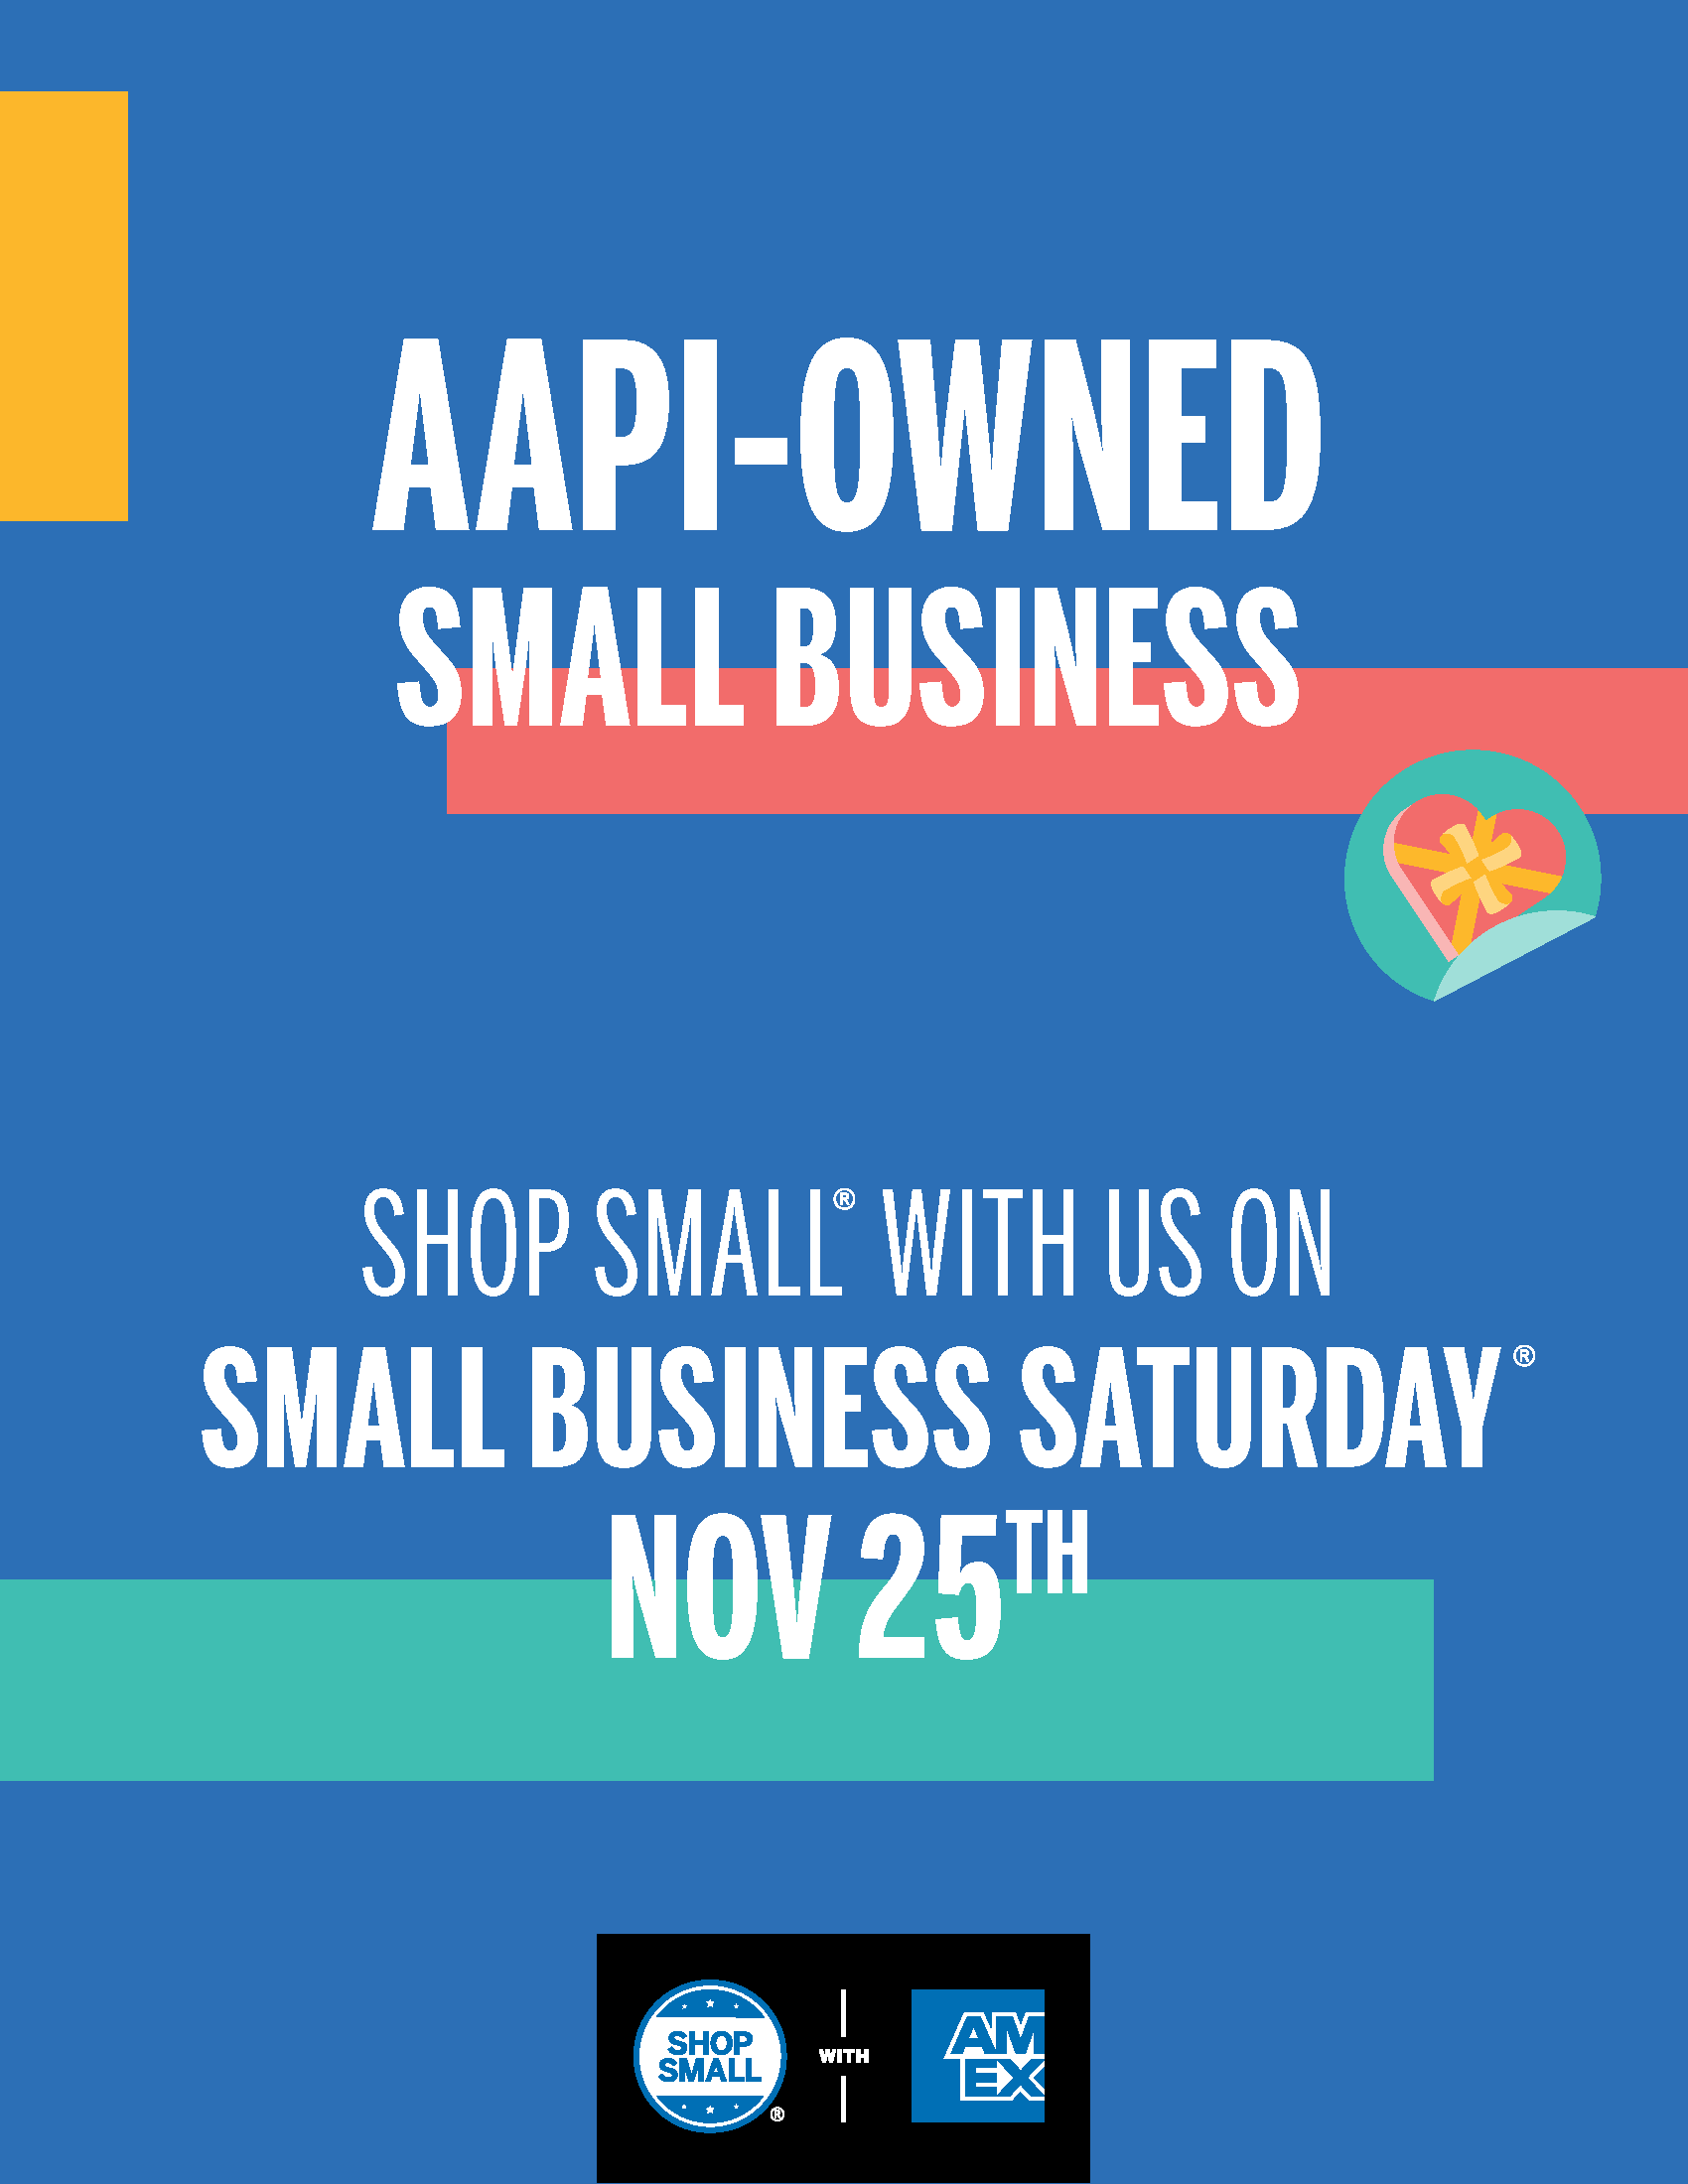 Thumbnail image of Poster PDF that reads AAPI-Owned Small Business; Shop Small with us on Small Business Saturday Nov 25th and includes the Shop Small with Amex logo